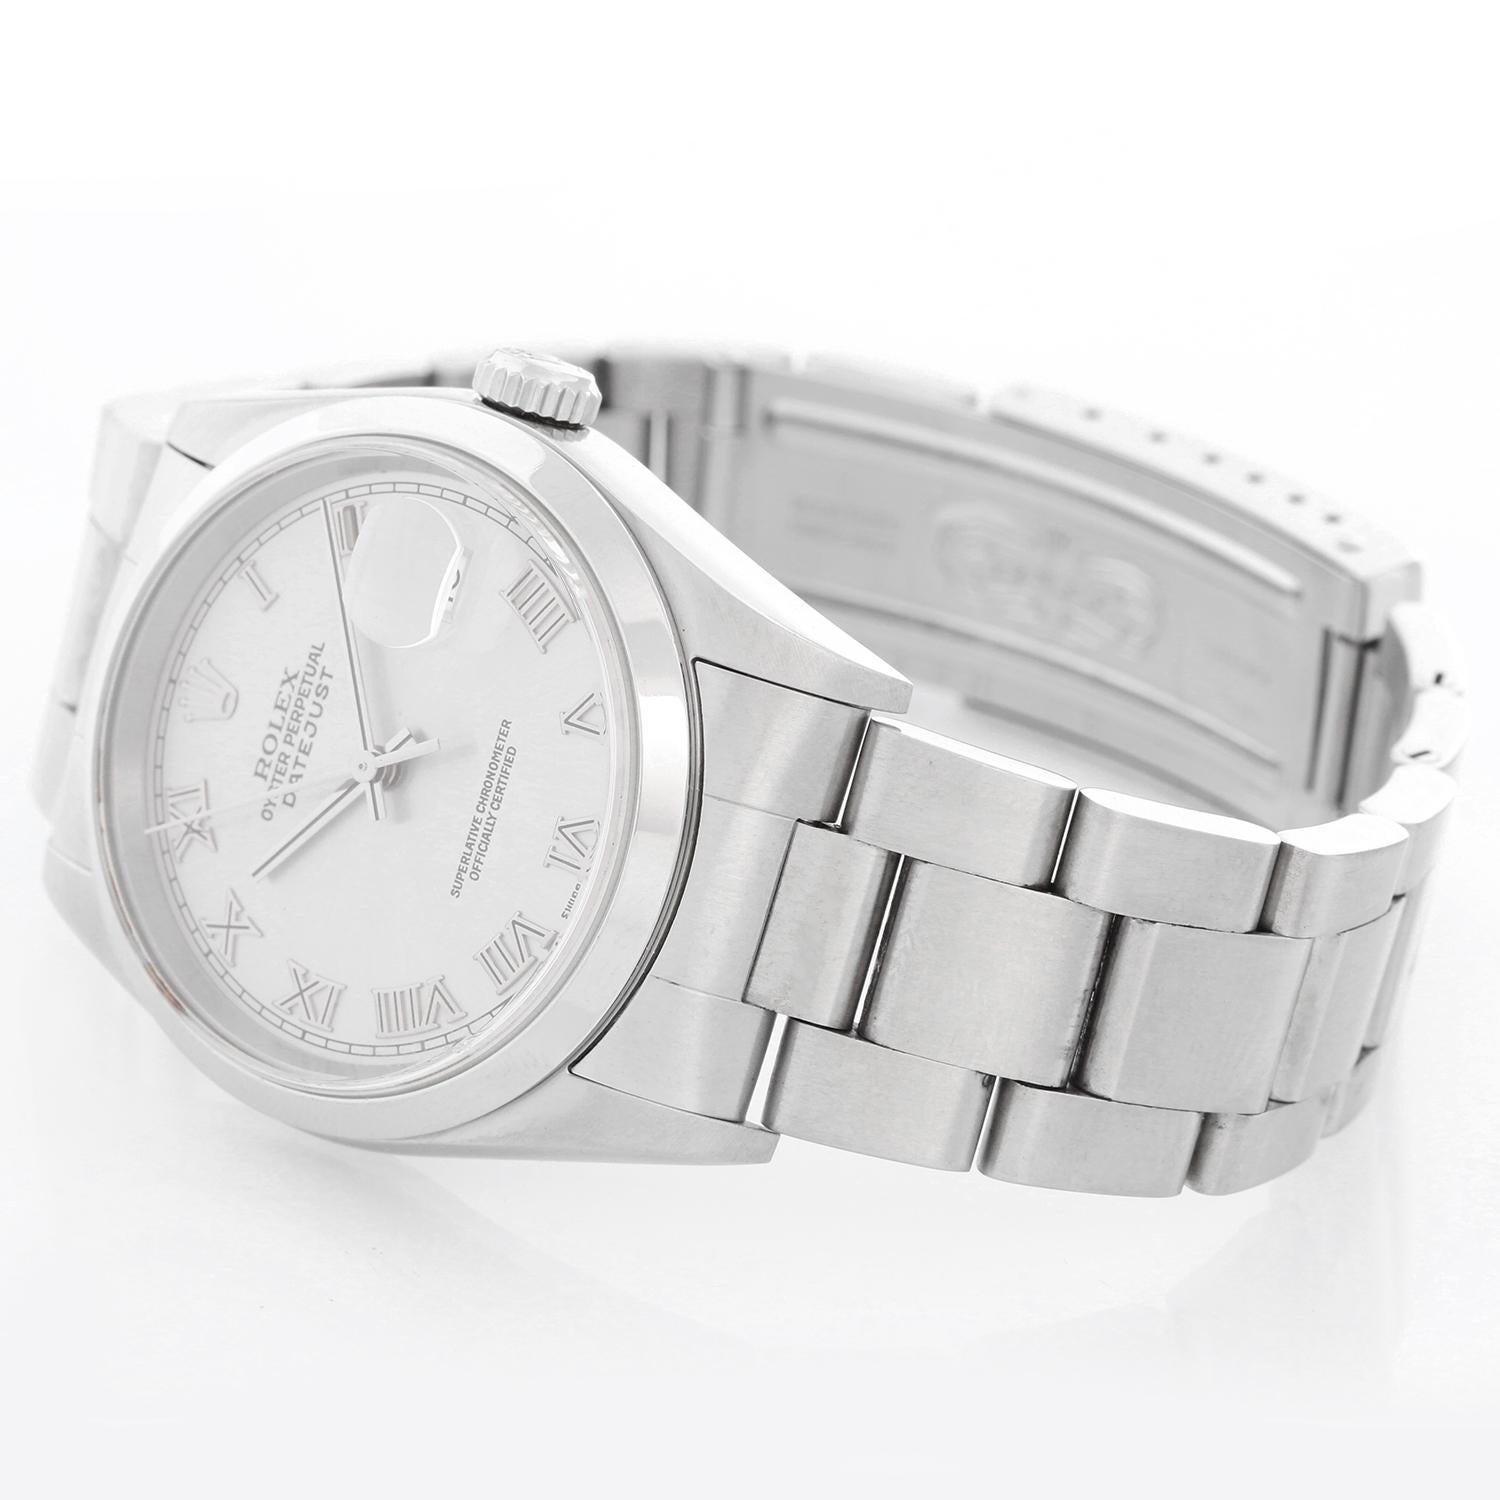 Rolex Datejust Men's Stainless Steel Automatic Winding Watch 16200 - Automatic winding, 31 jewels, Quickset, sapphire crystal. Stainless steel case with smooth bezel (36mm diameter). Silver dial with raised Roman numerals. Stainless steel oyster